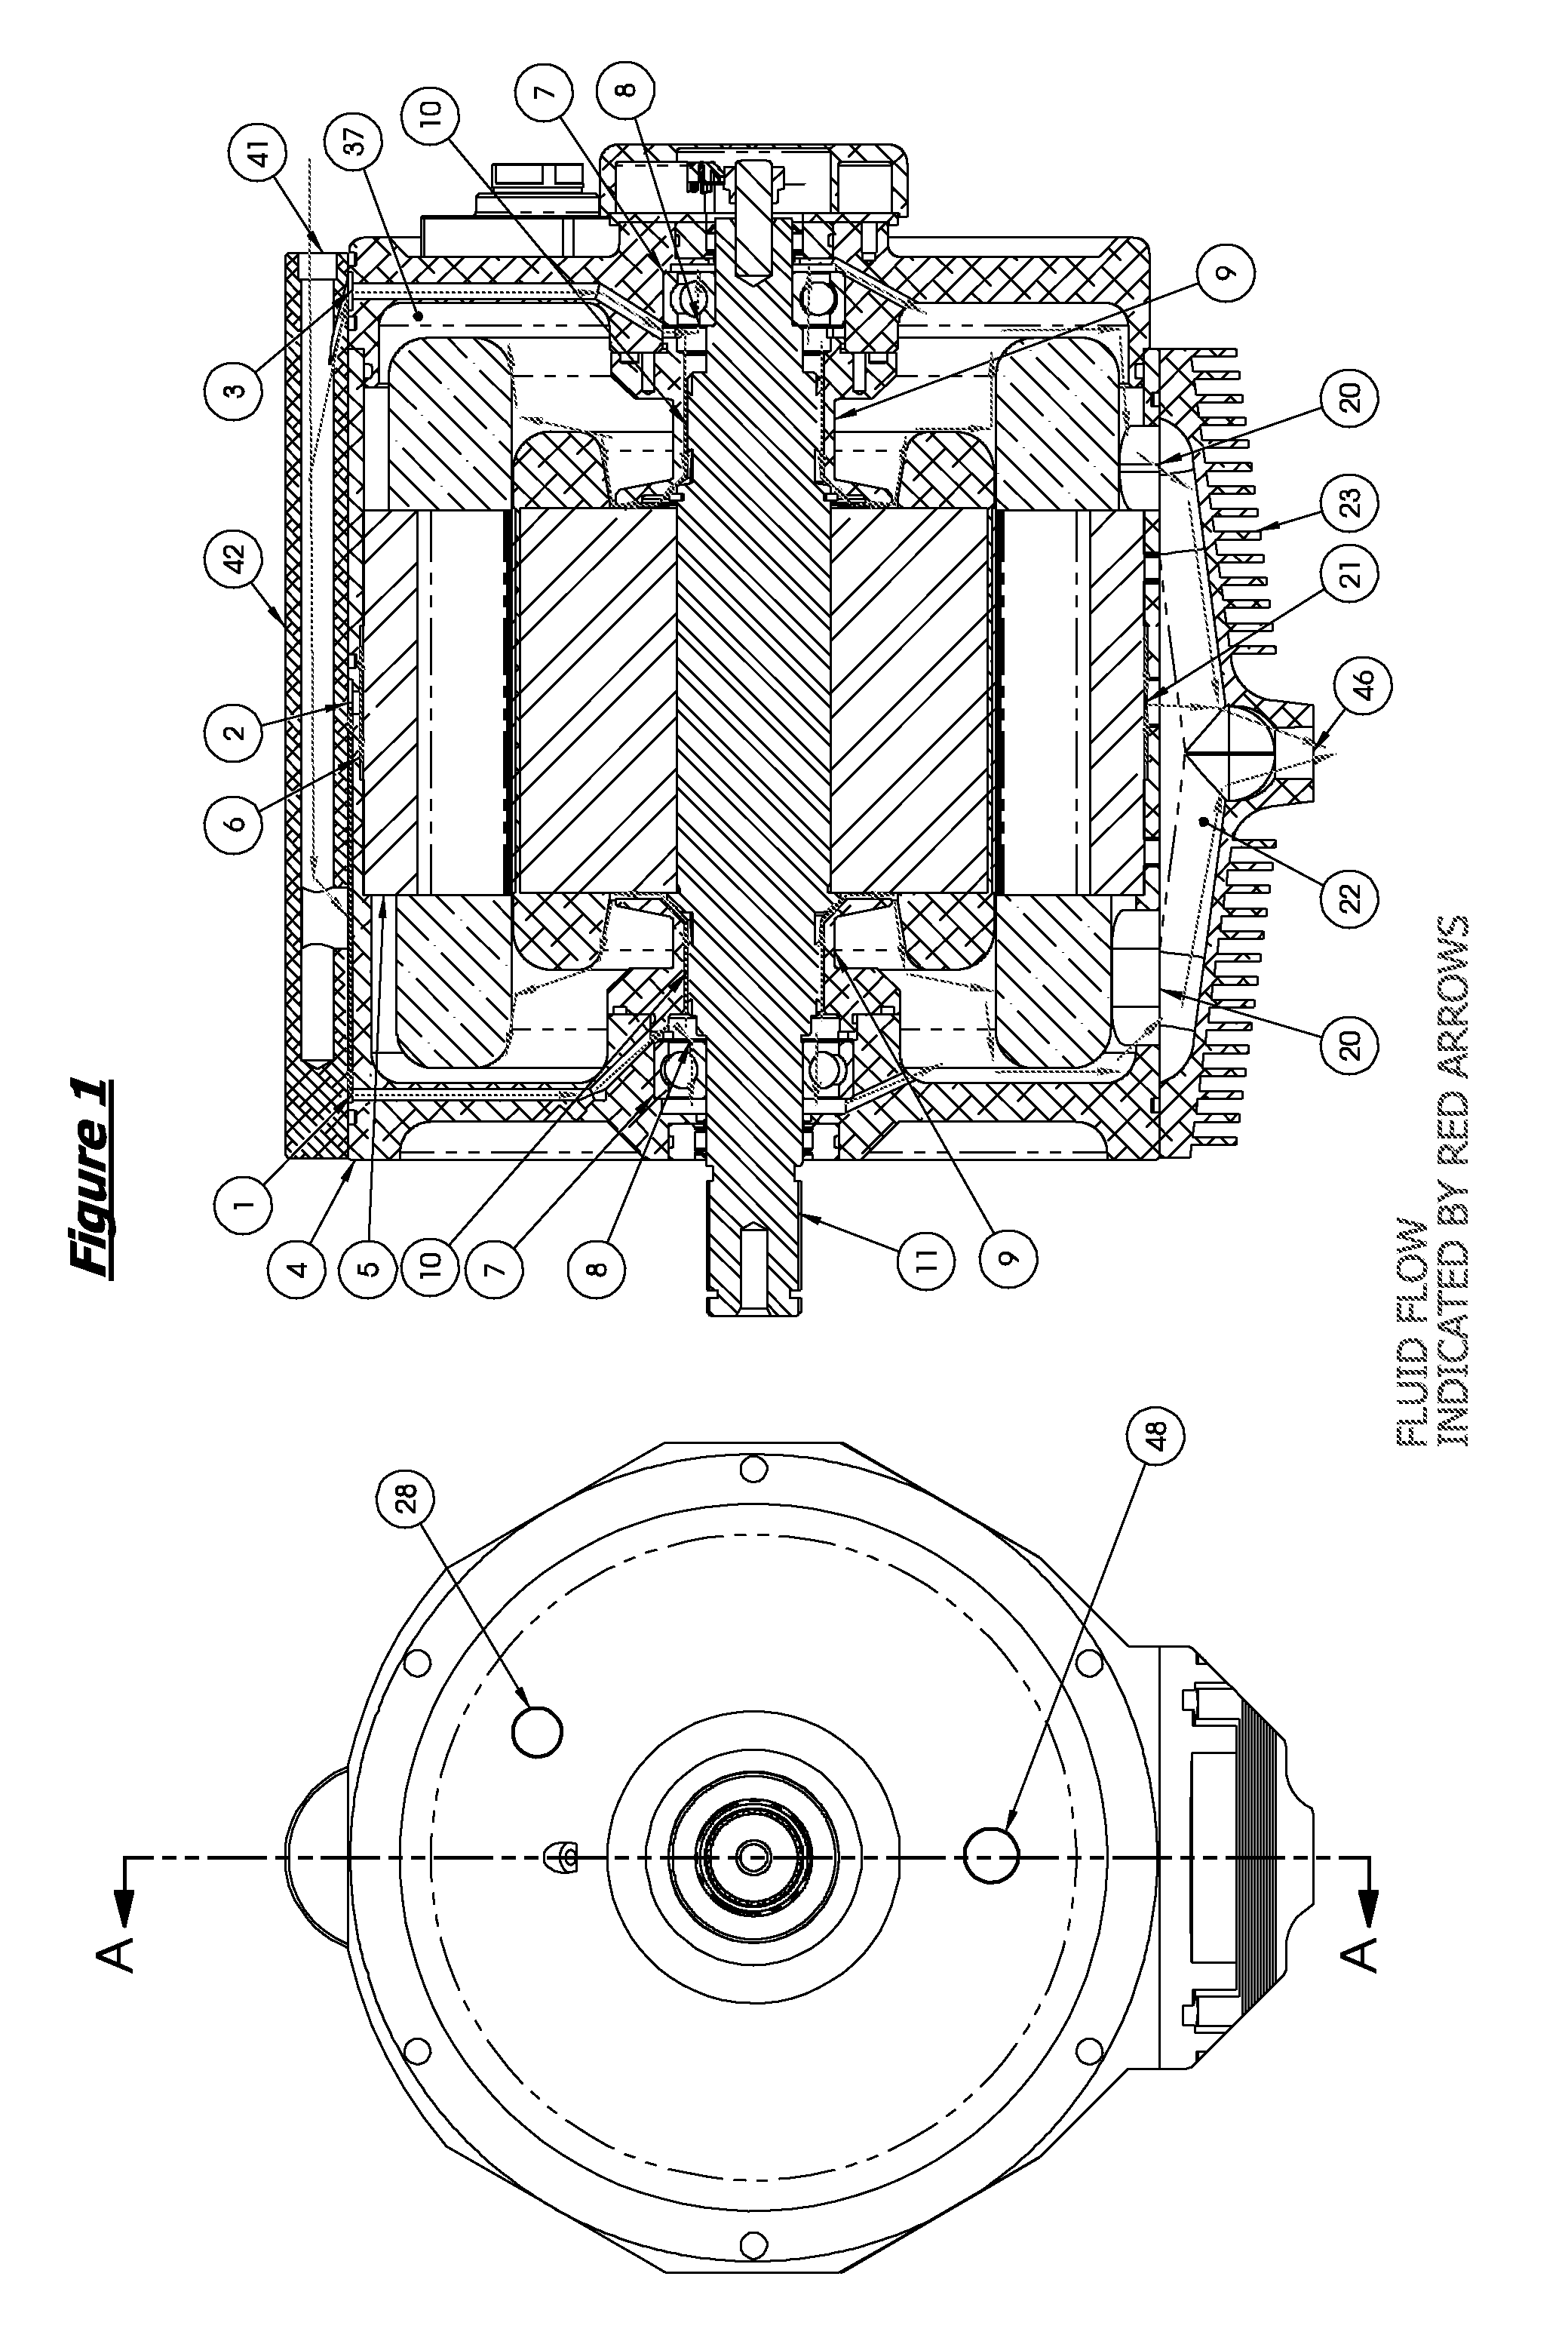 Systems and methods for fluid cooling of electric machines